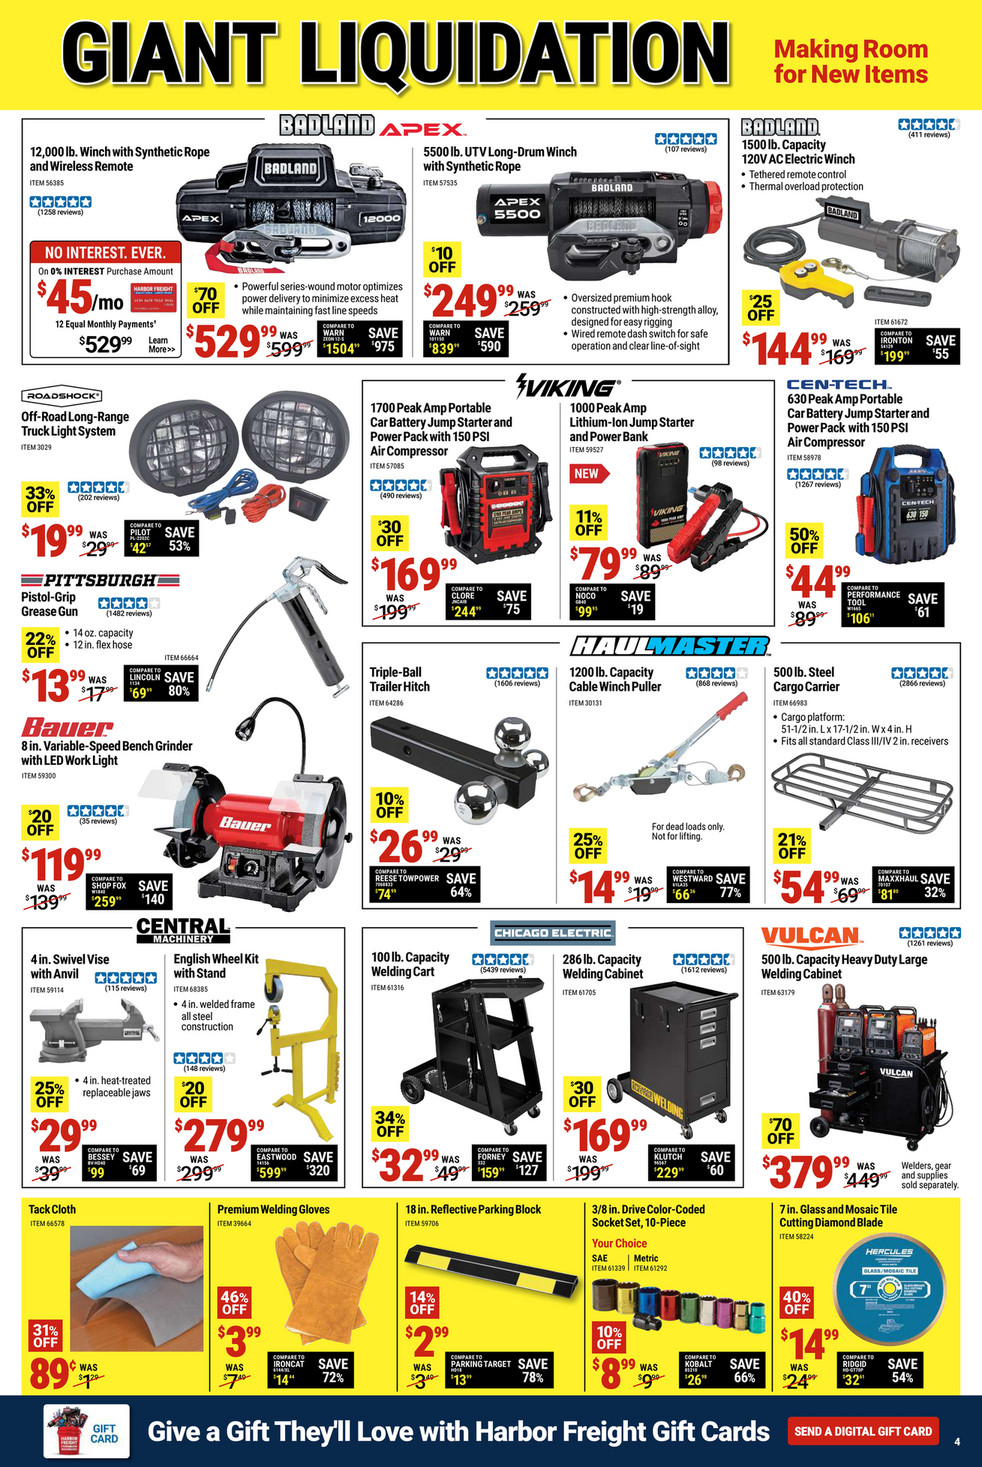 Harbor Freight Tools January Giant Liquidation Sale - 5500 lb. UTV Long-Drum  Winch with Synthetic Rope